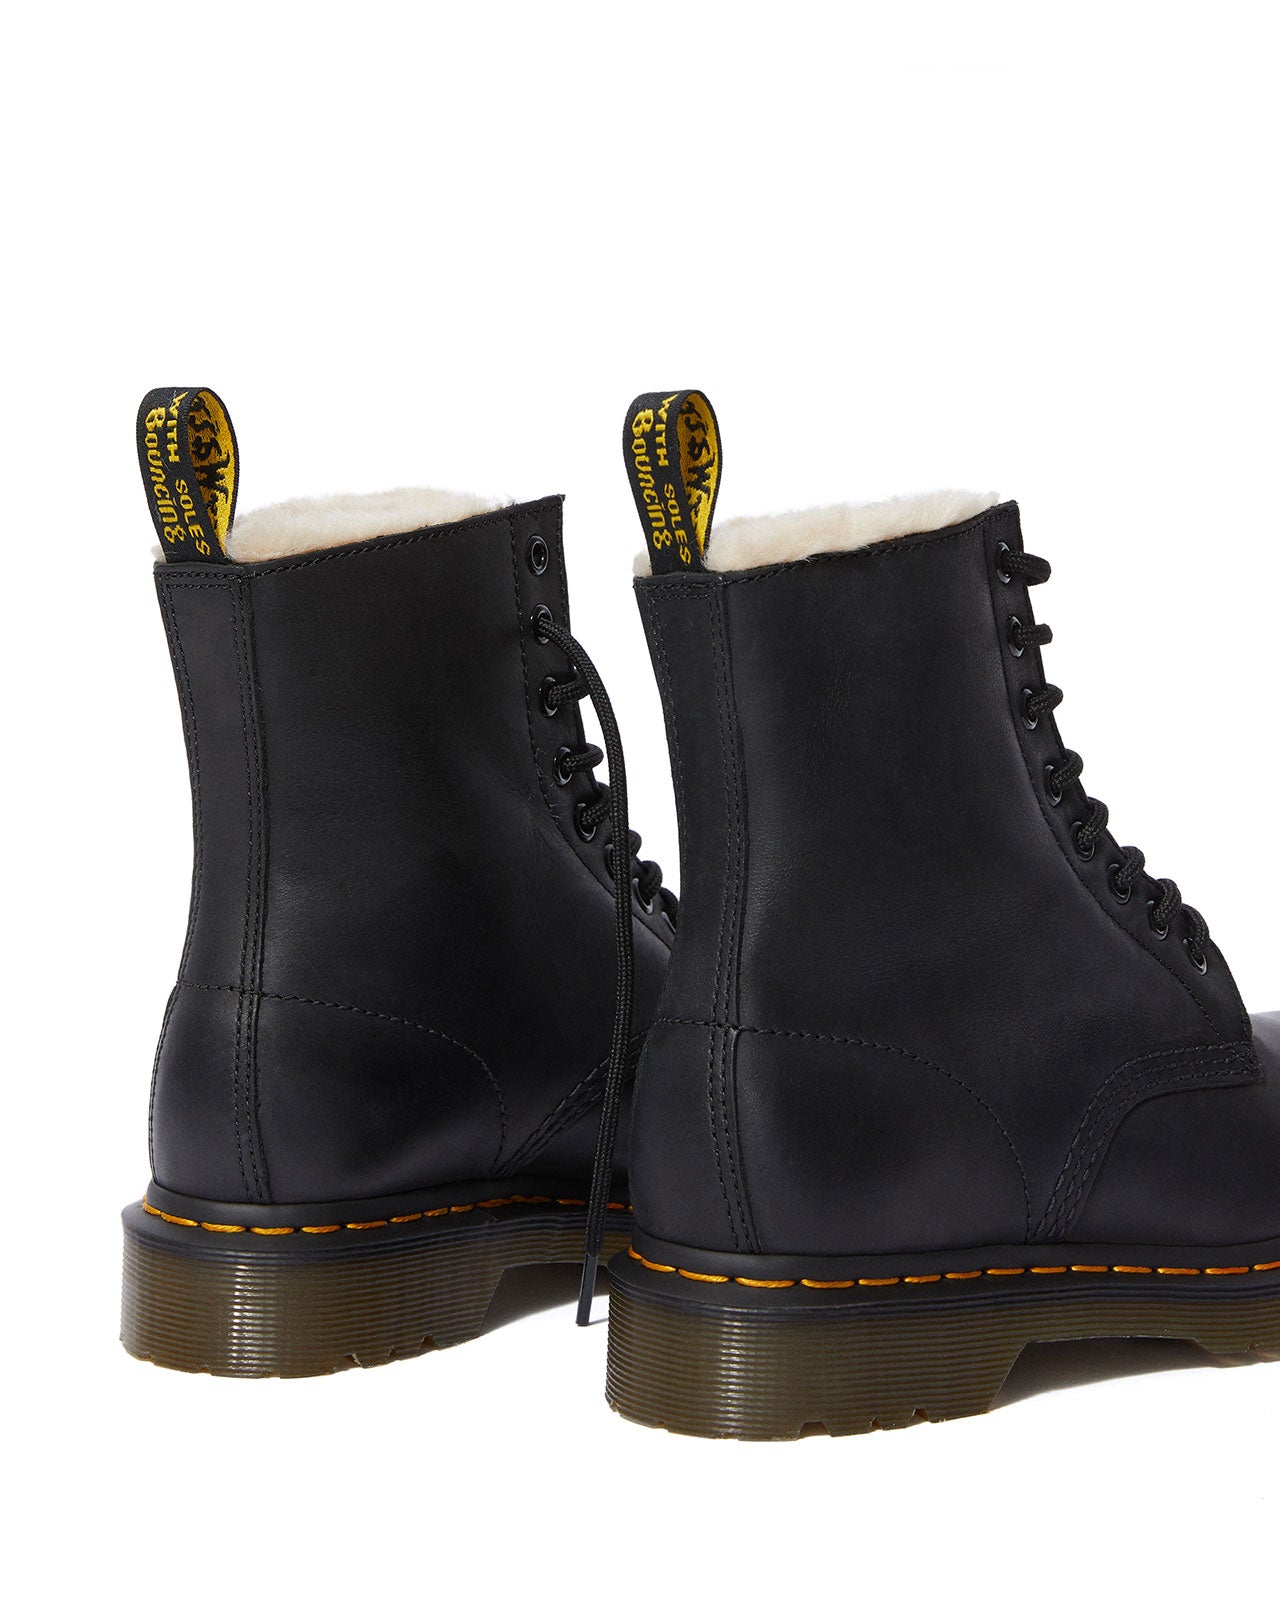 1460 Dr Martens FUR-LINED SERENA WYOMING Posers Hollywood